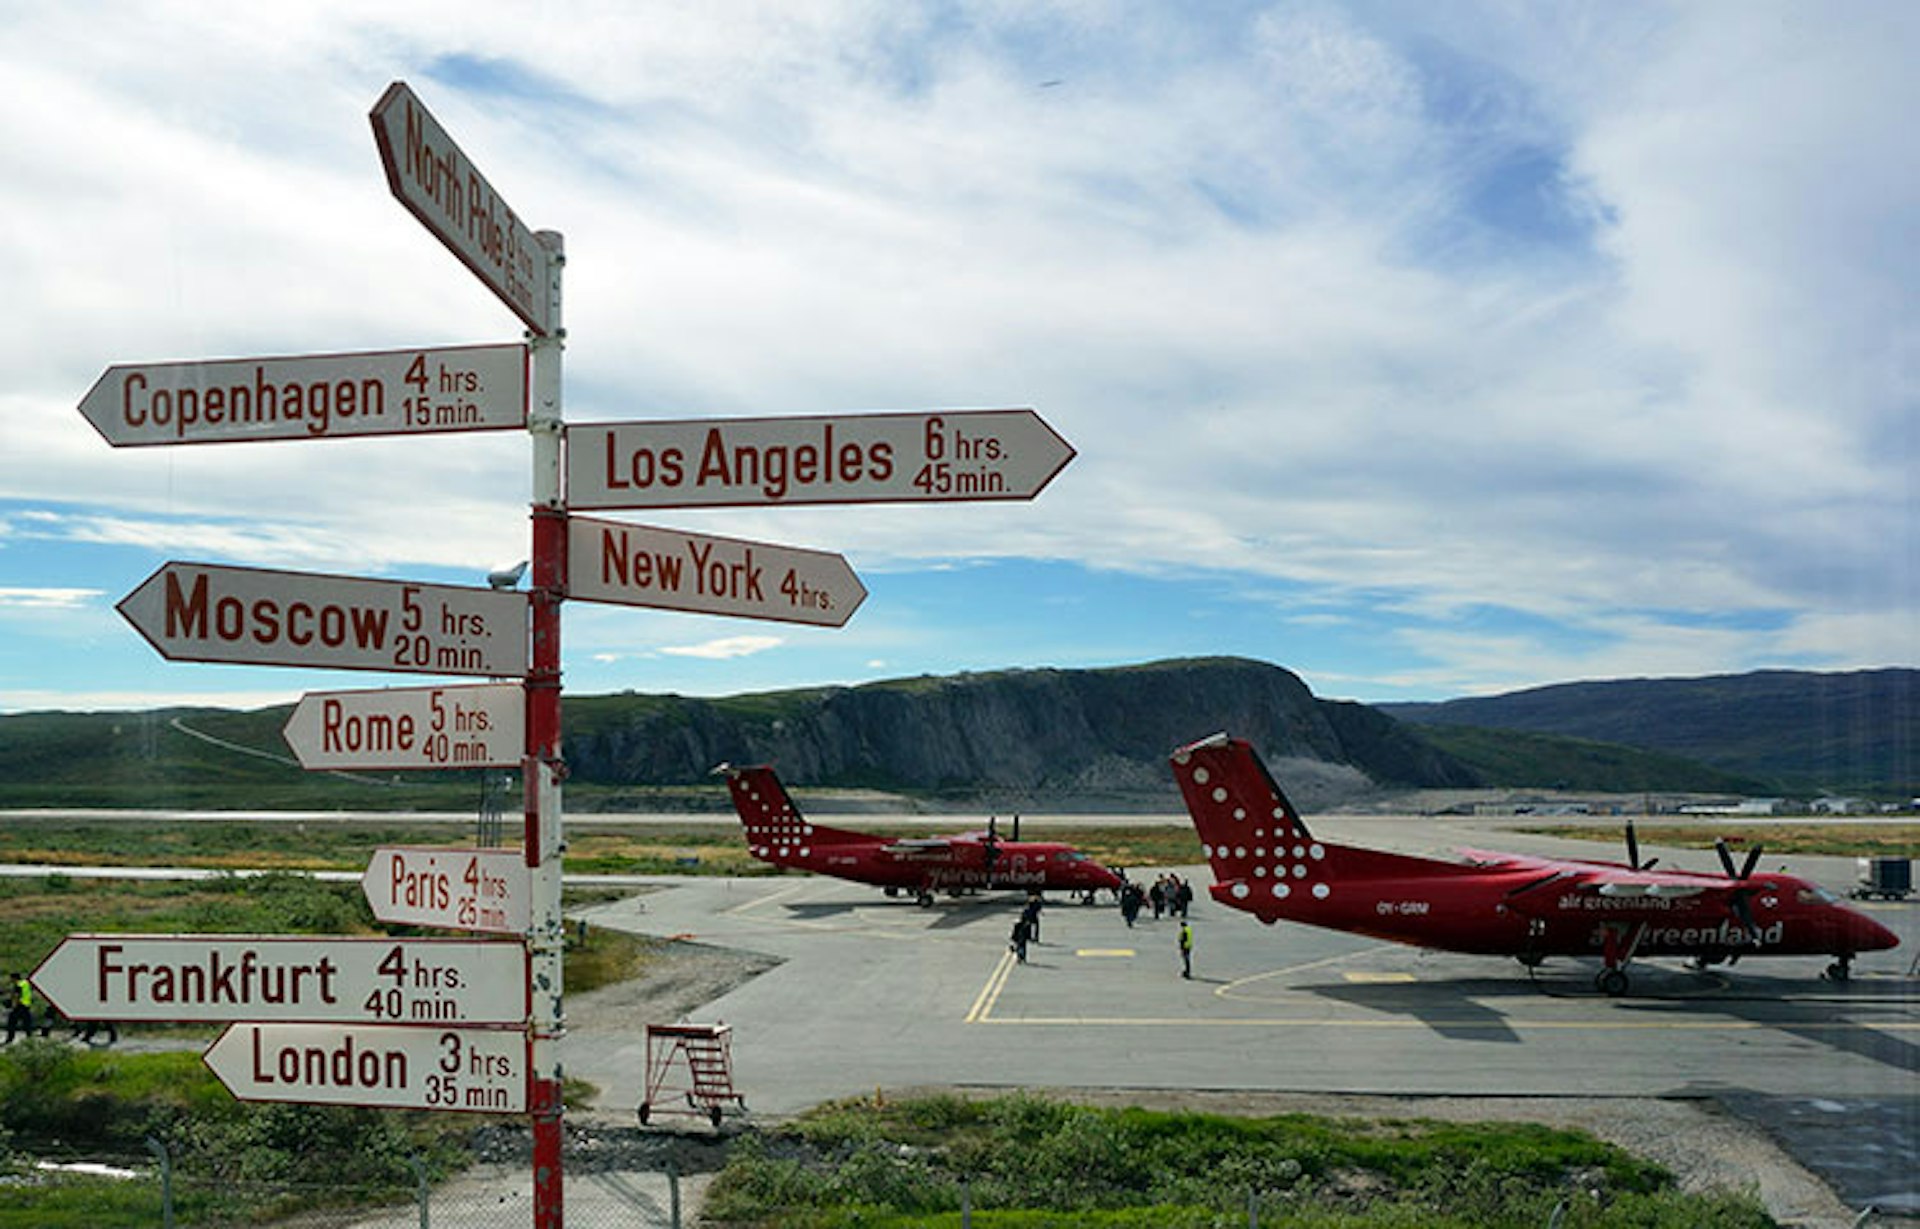 A sign pointing to a number of international destinations, including Cophenhagen, LA and London, with a background of red Air Greenland planes, against a rocky backdrop in Kangerlussuaq, Greenland